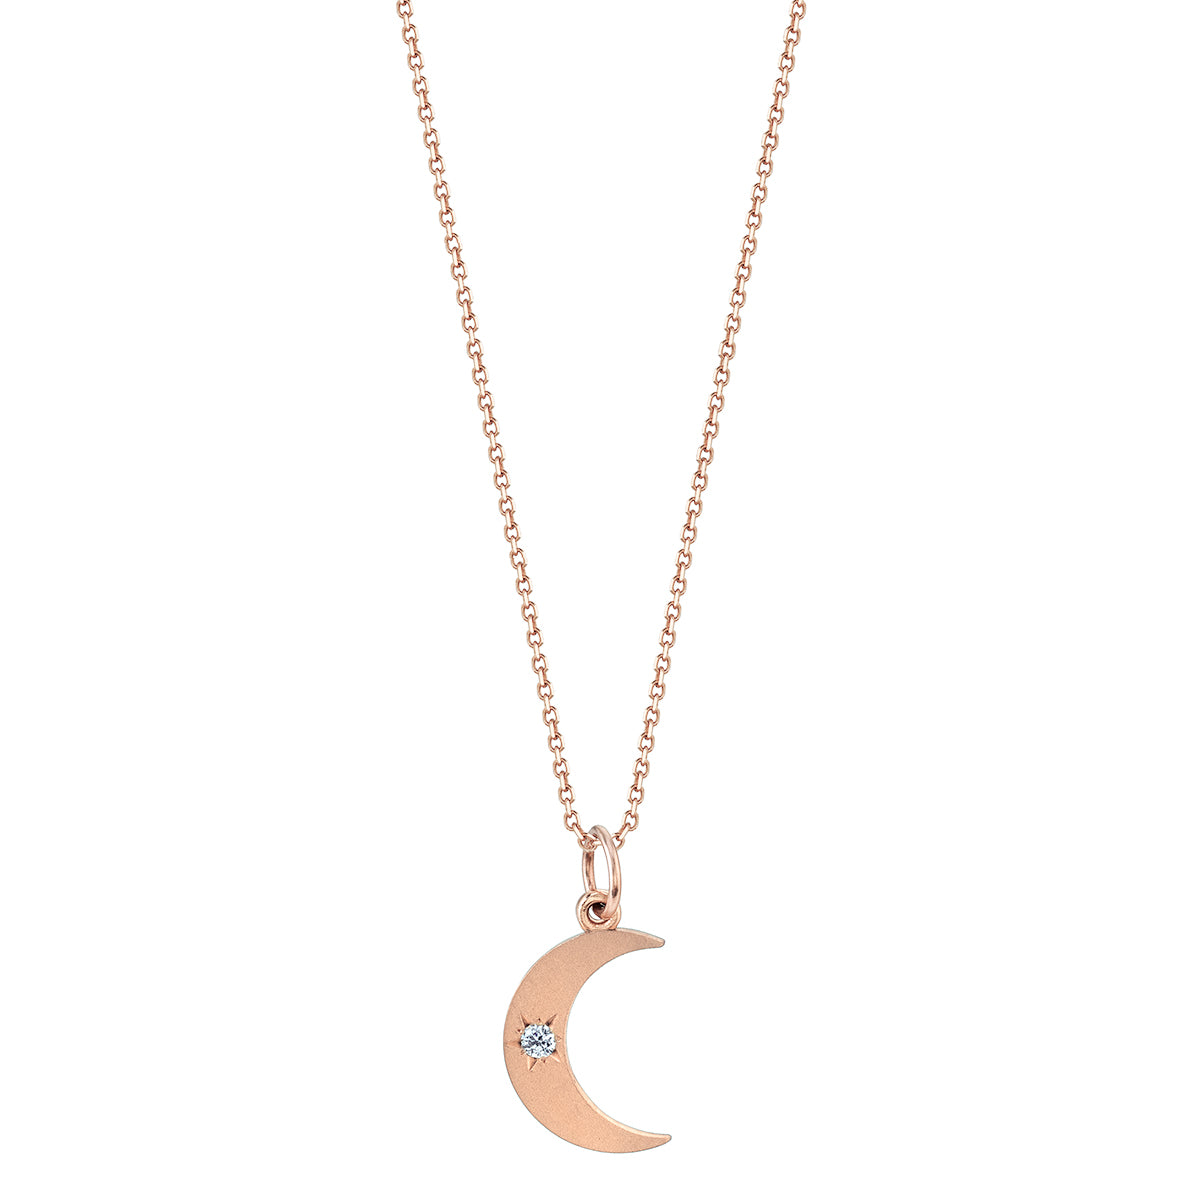 Handmade Solid Gold Crescent Moon Charm Necklace - Etsy